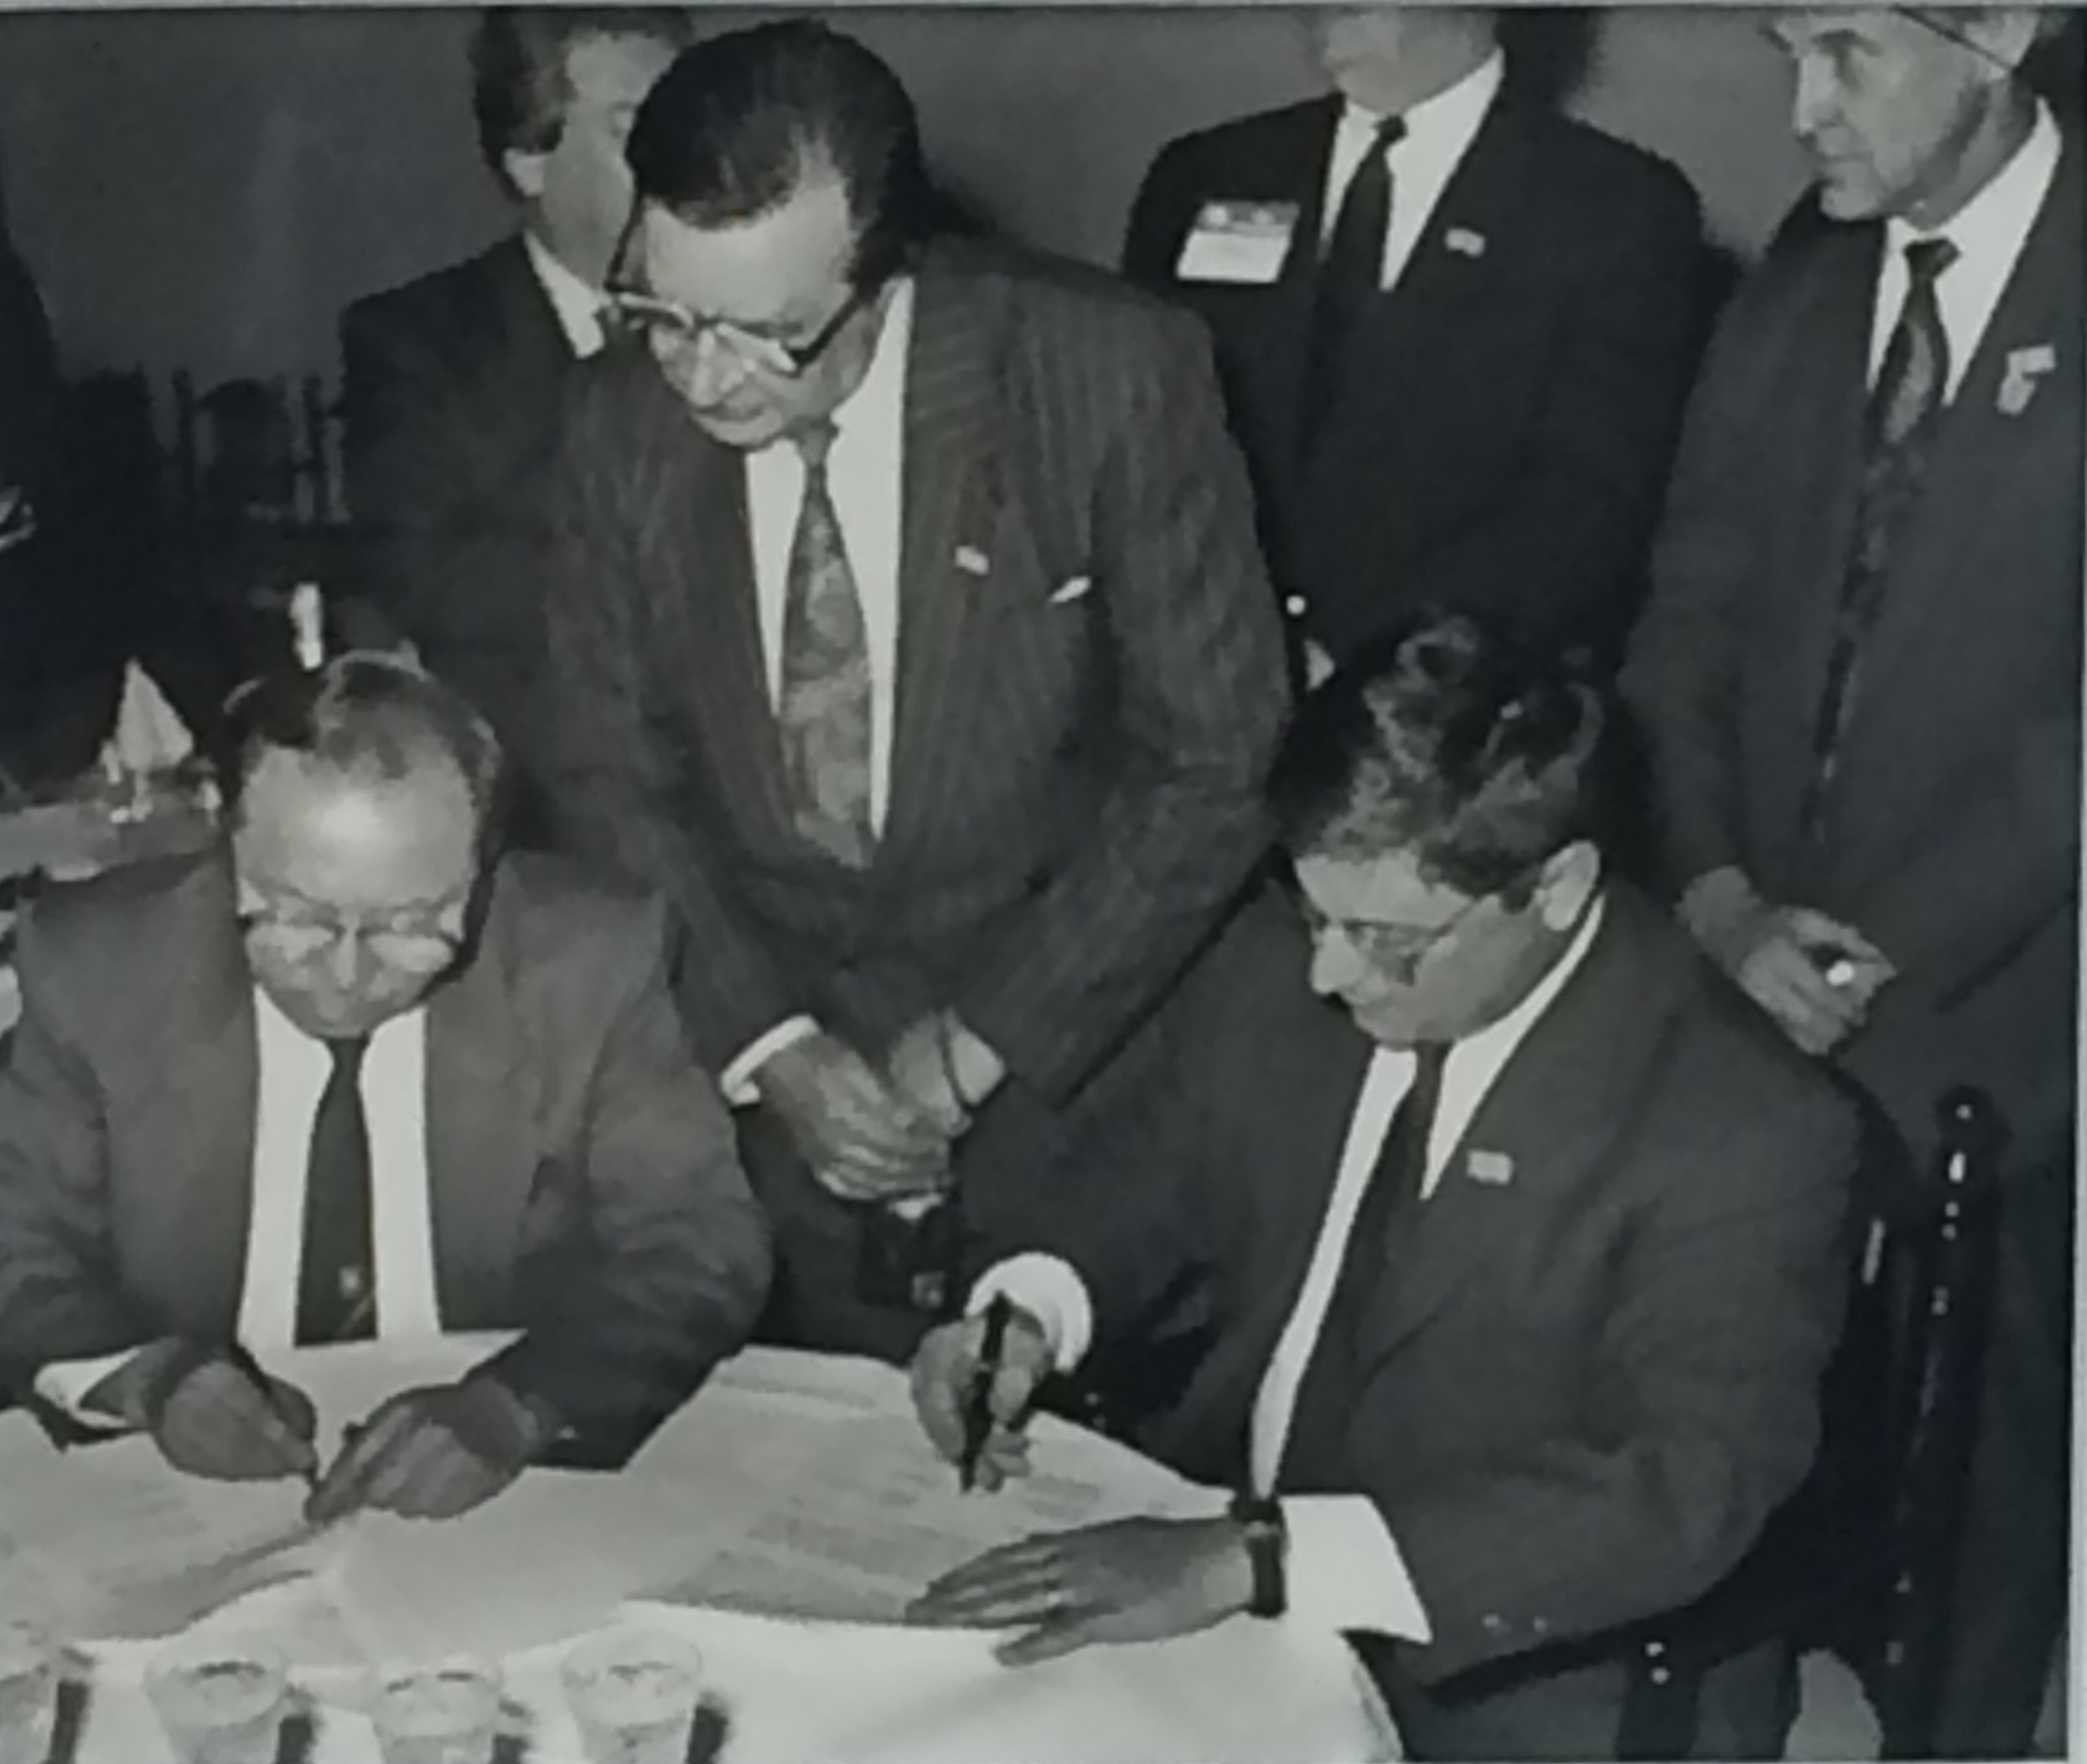  Kazakhstan’s Minister of Finance Yerkeshbay Derbisov and Dan Witt sign an agreement to launch ITIC in March 1993, while State Revenue Administration Director General Marat Ospanov looks on. 